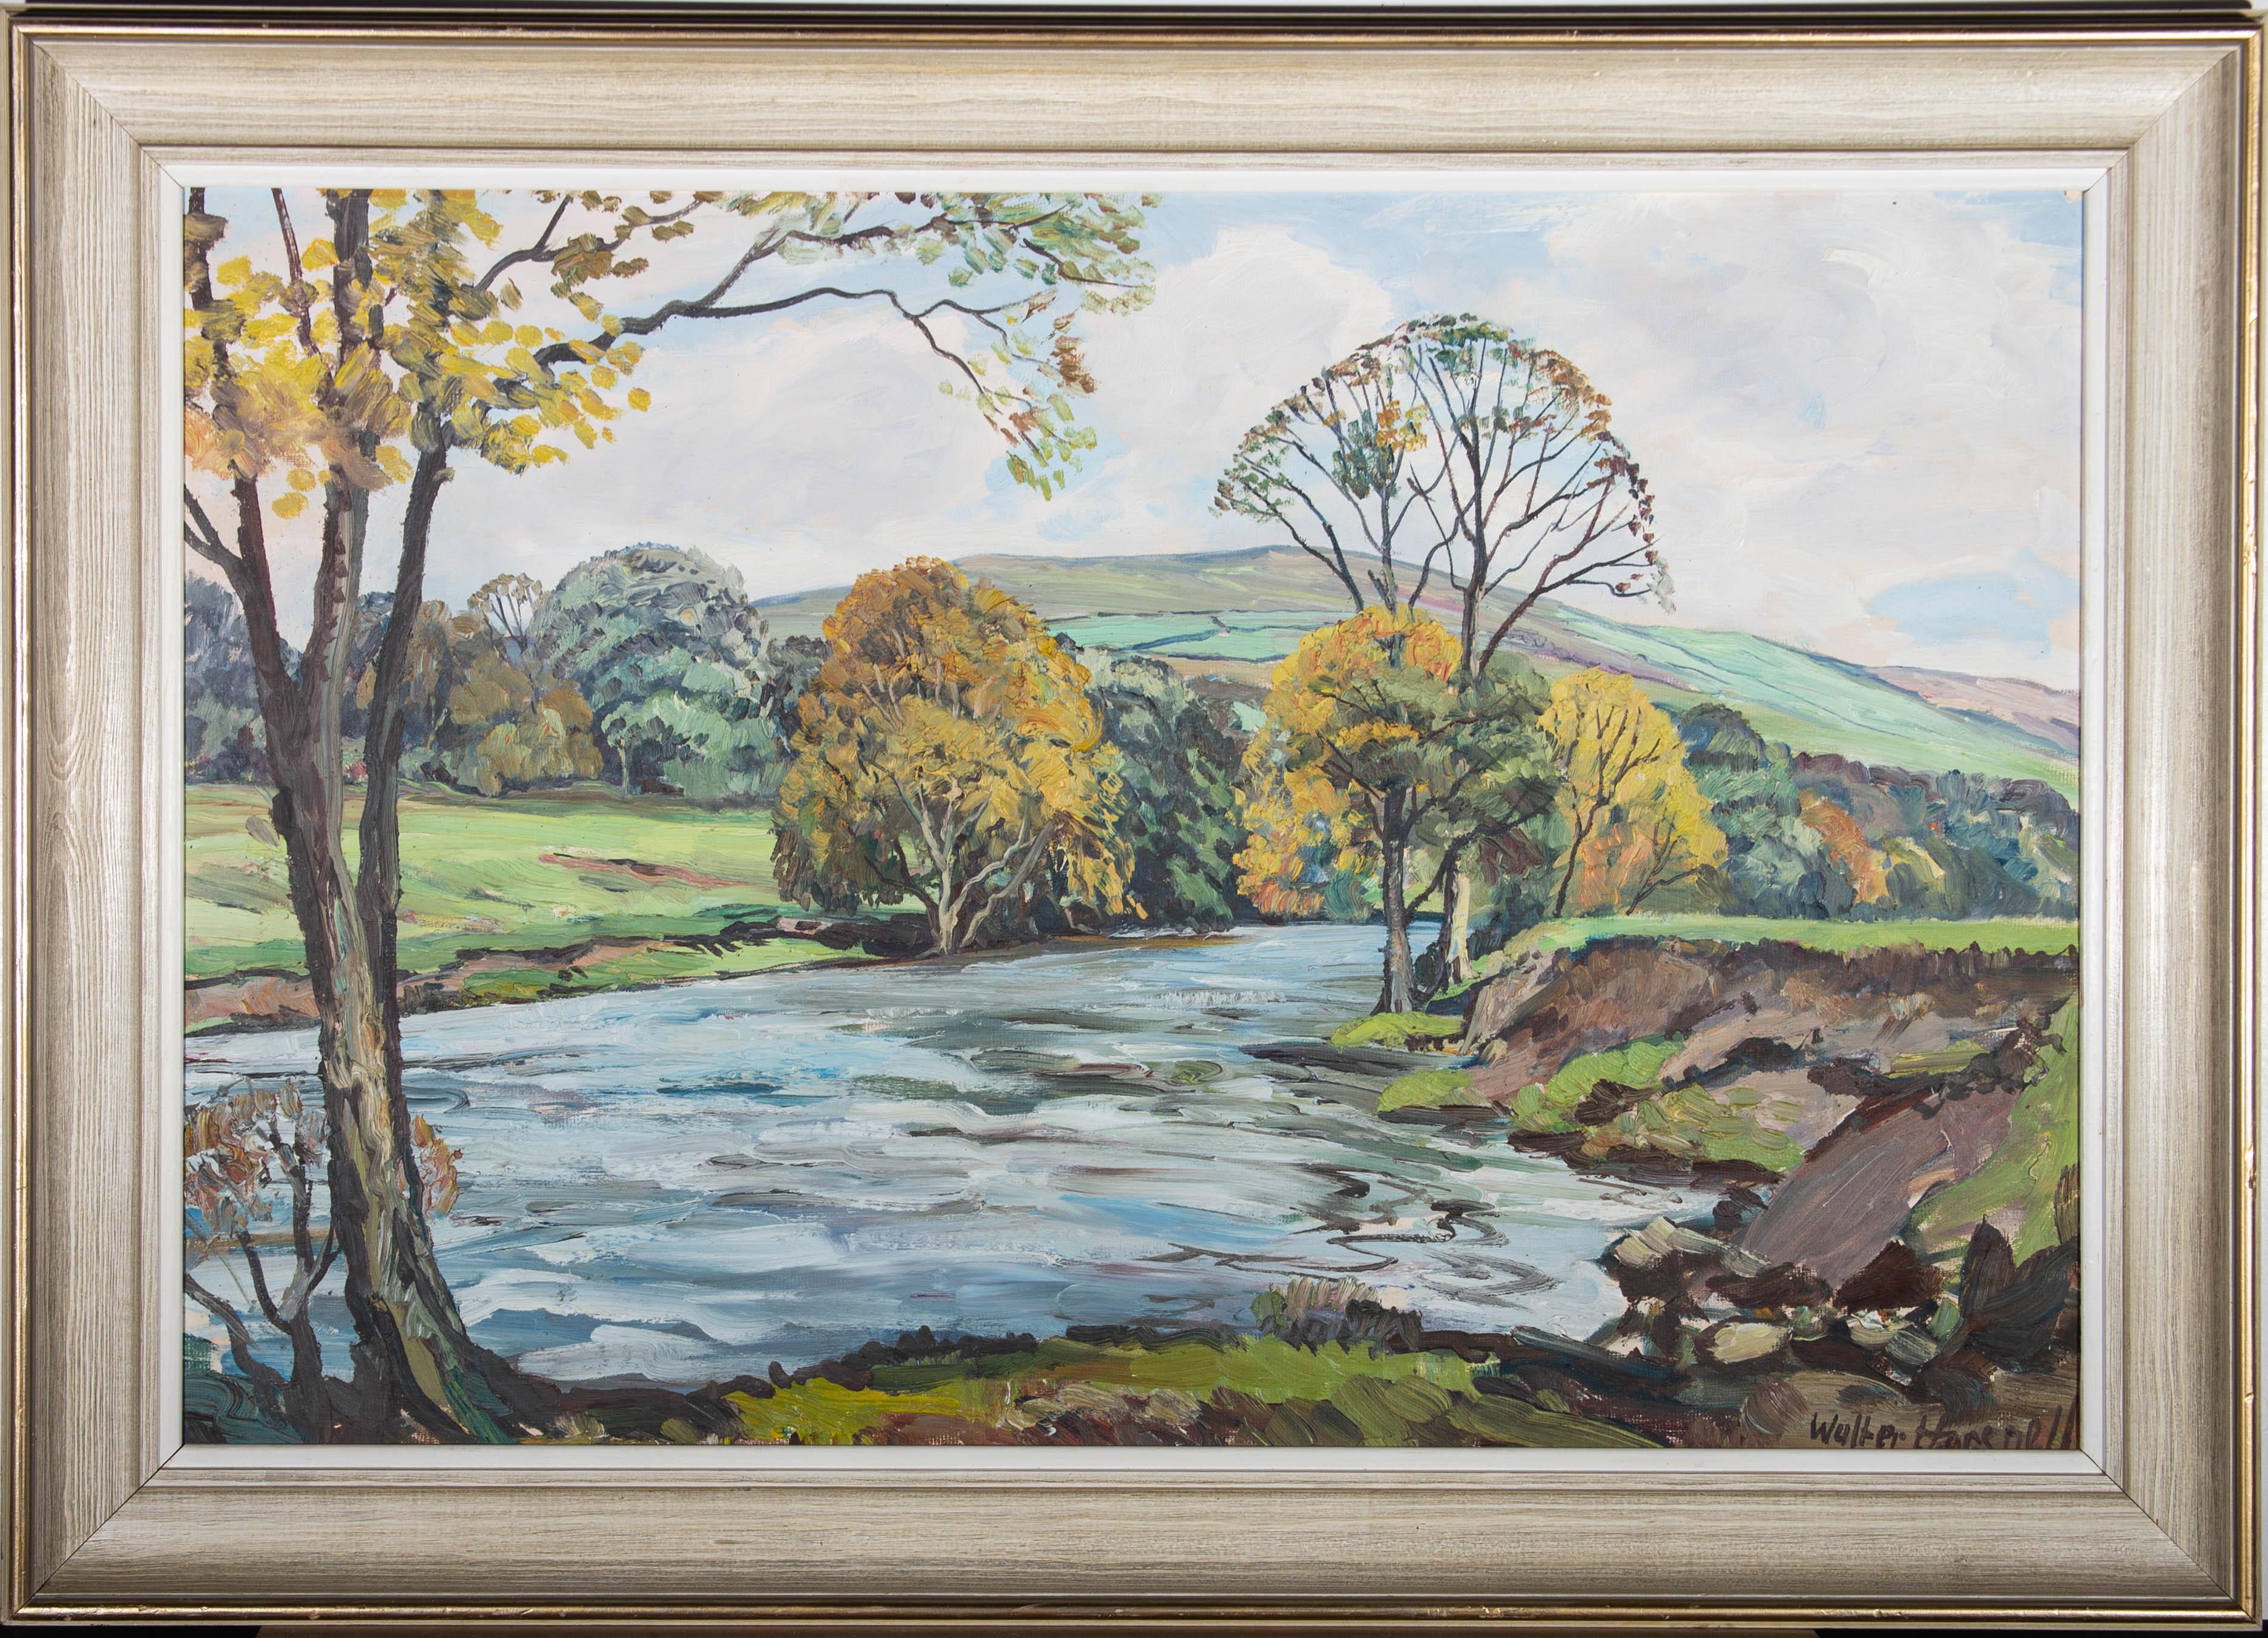 A wonderfully expressive landscape with a river and rolling hills. The artist has captured the movement in this rural scene, using bold, gestural brushstrokes and a soft colour palette. Signed to the lower right. Well presented in a light wood frame